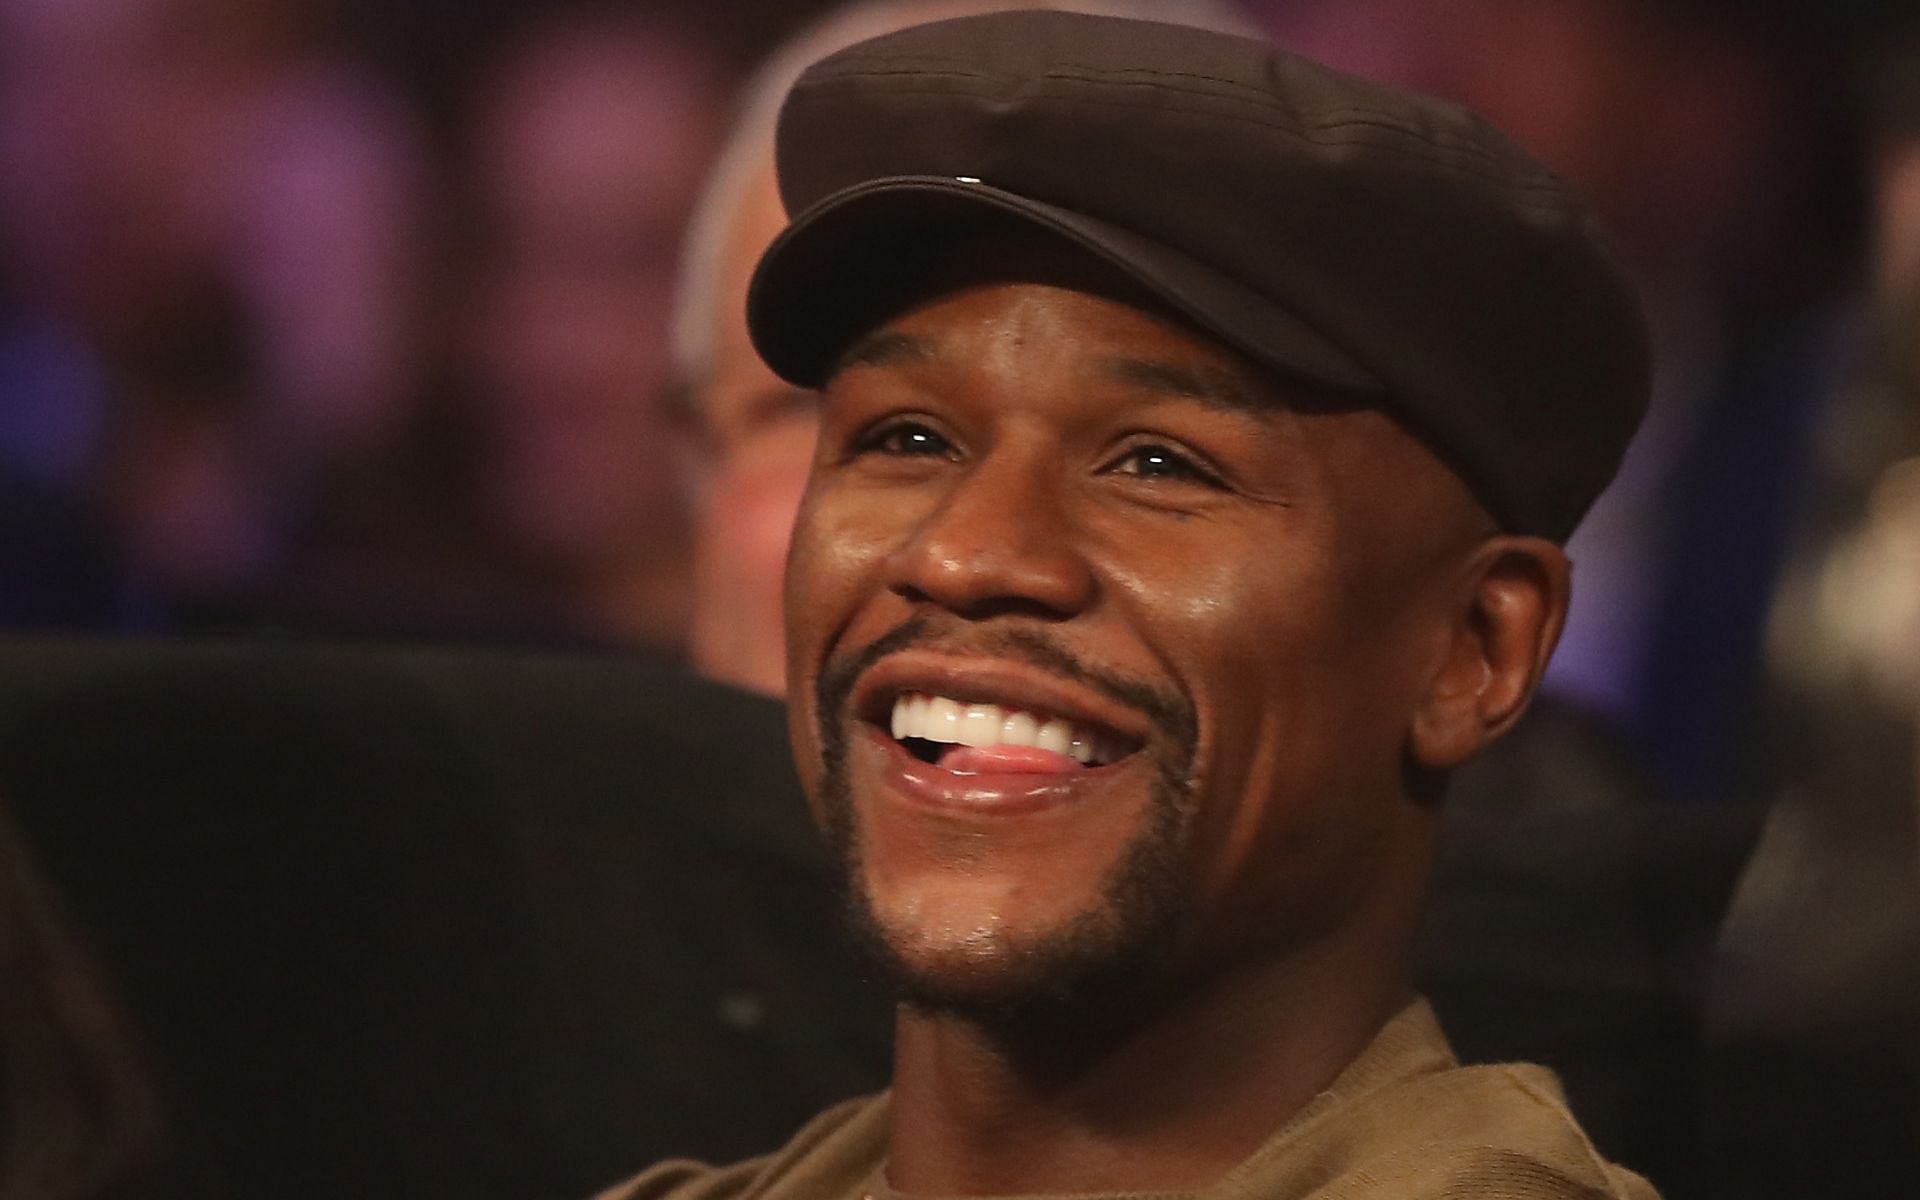 Former five-weight class boxing world champion Floyd Mayweather Jr. at an event